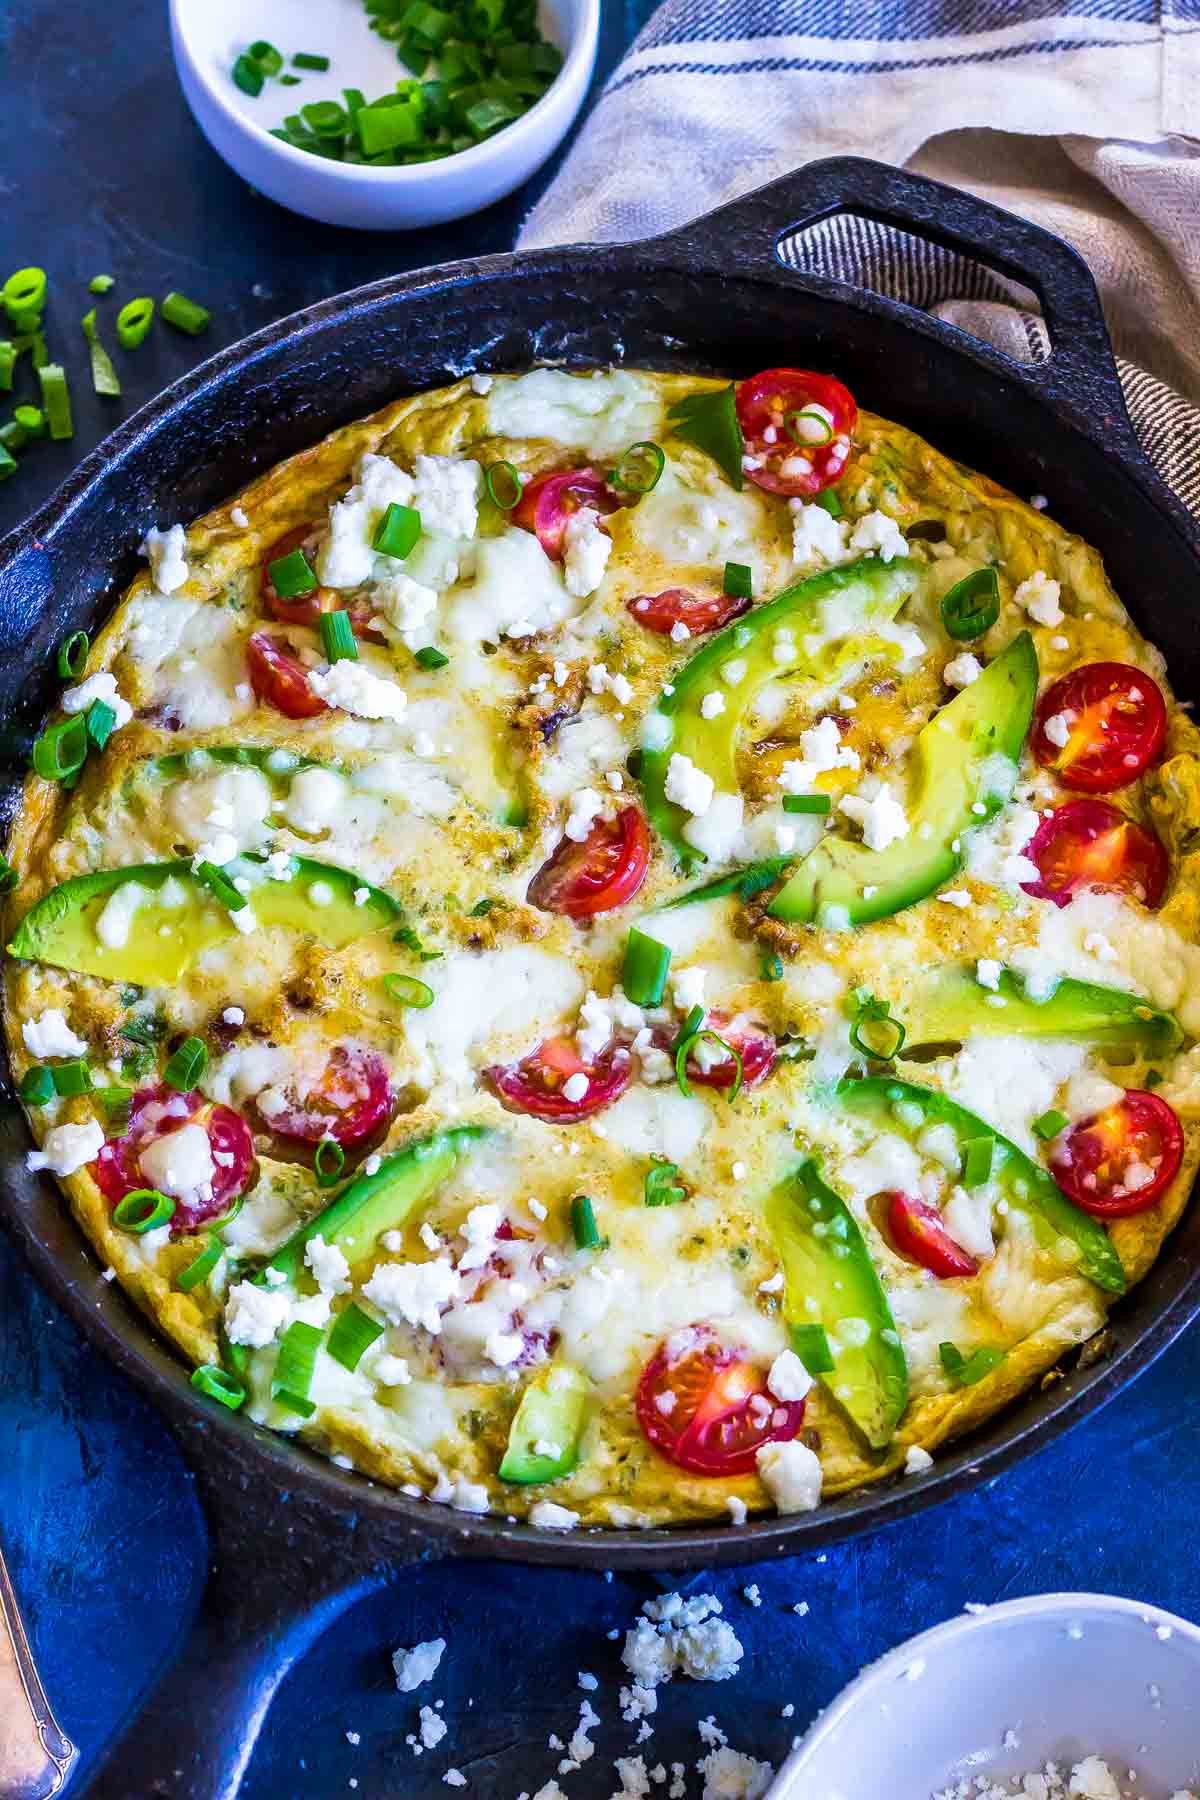 On a blue surface is a cast iron round pan with a frittata in it made of eggs, avocado slices, cherry tomatoes and with cheese crumbled over the top. A white dish with chopped scallions is just behind, next to a blue and white striped table cloth